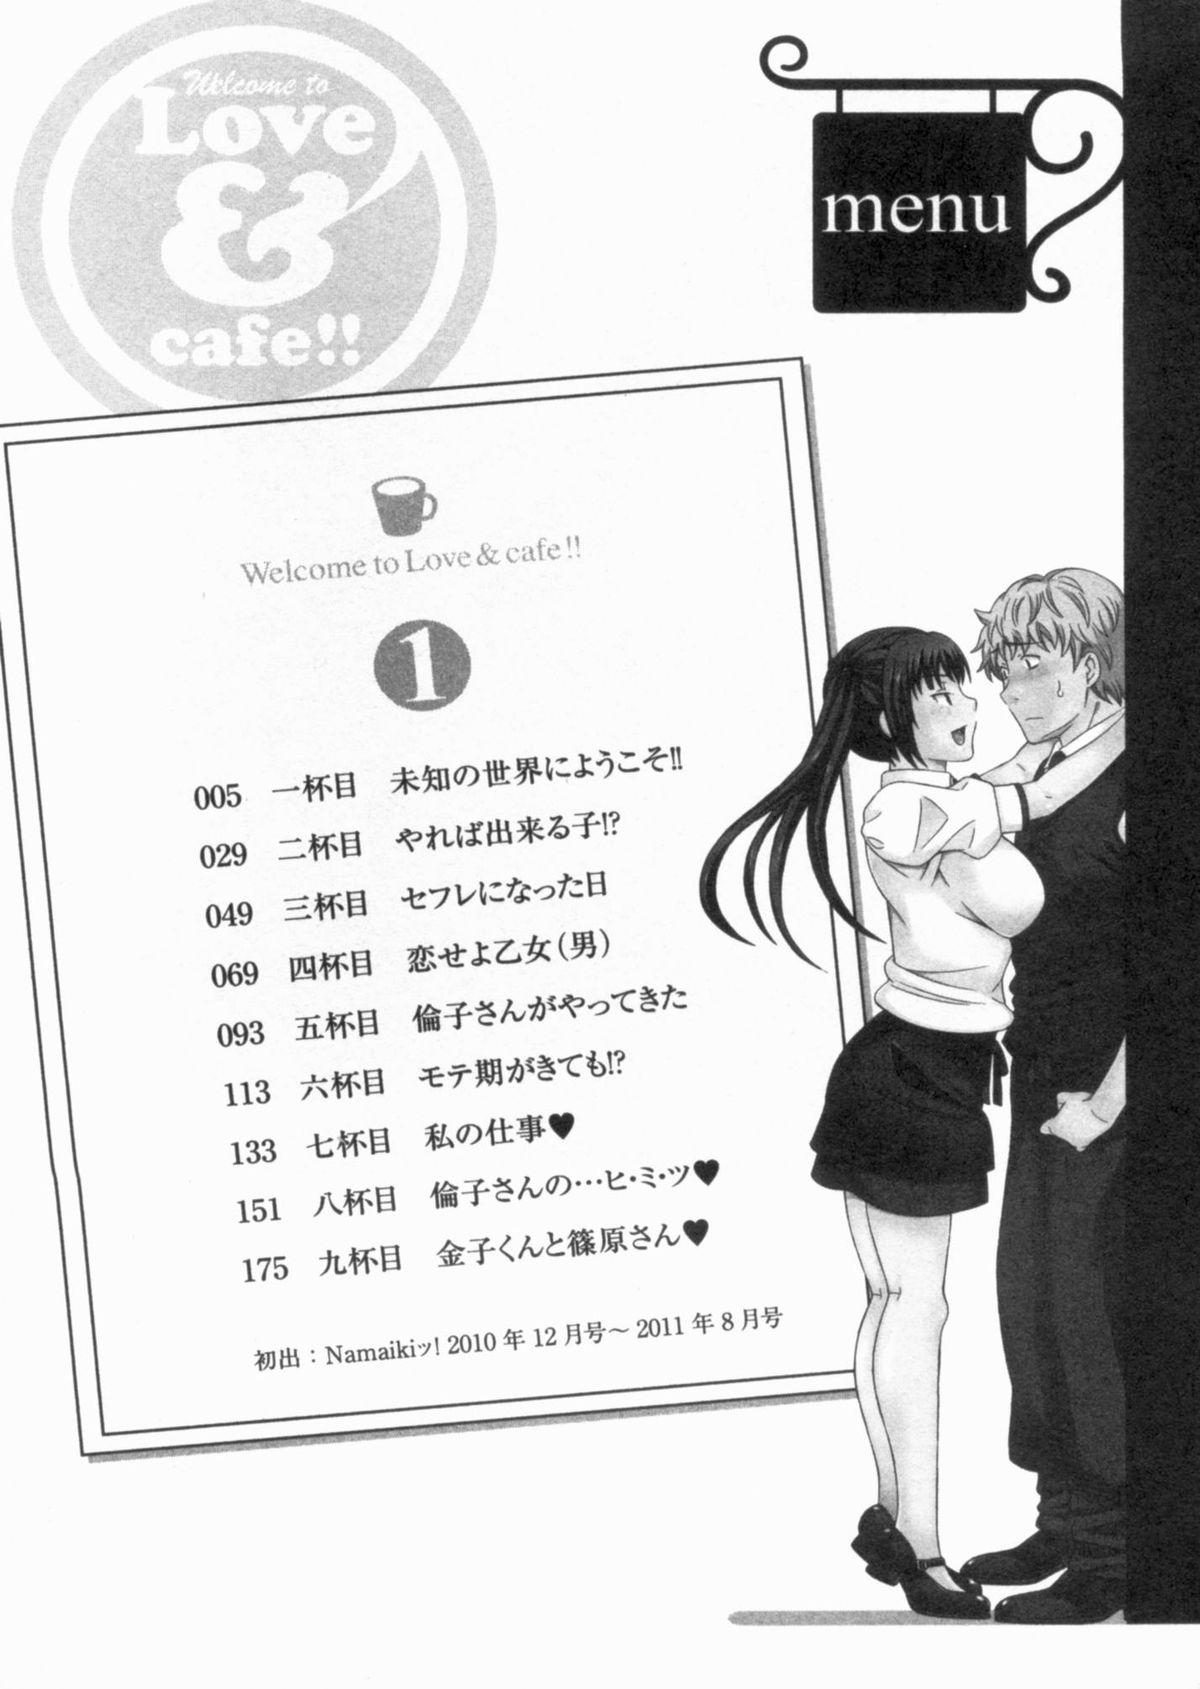 Puba Koi Cafe ni Youkoso!! 1 - Welcome to Love&cafe!! 1 Chinese - Page 6